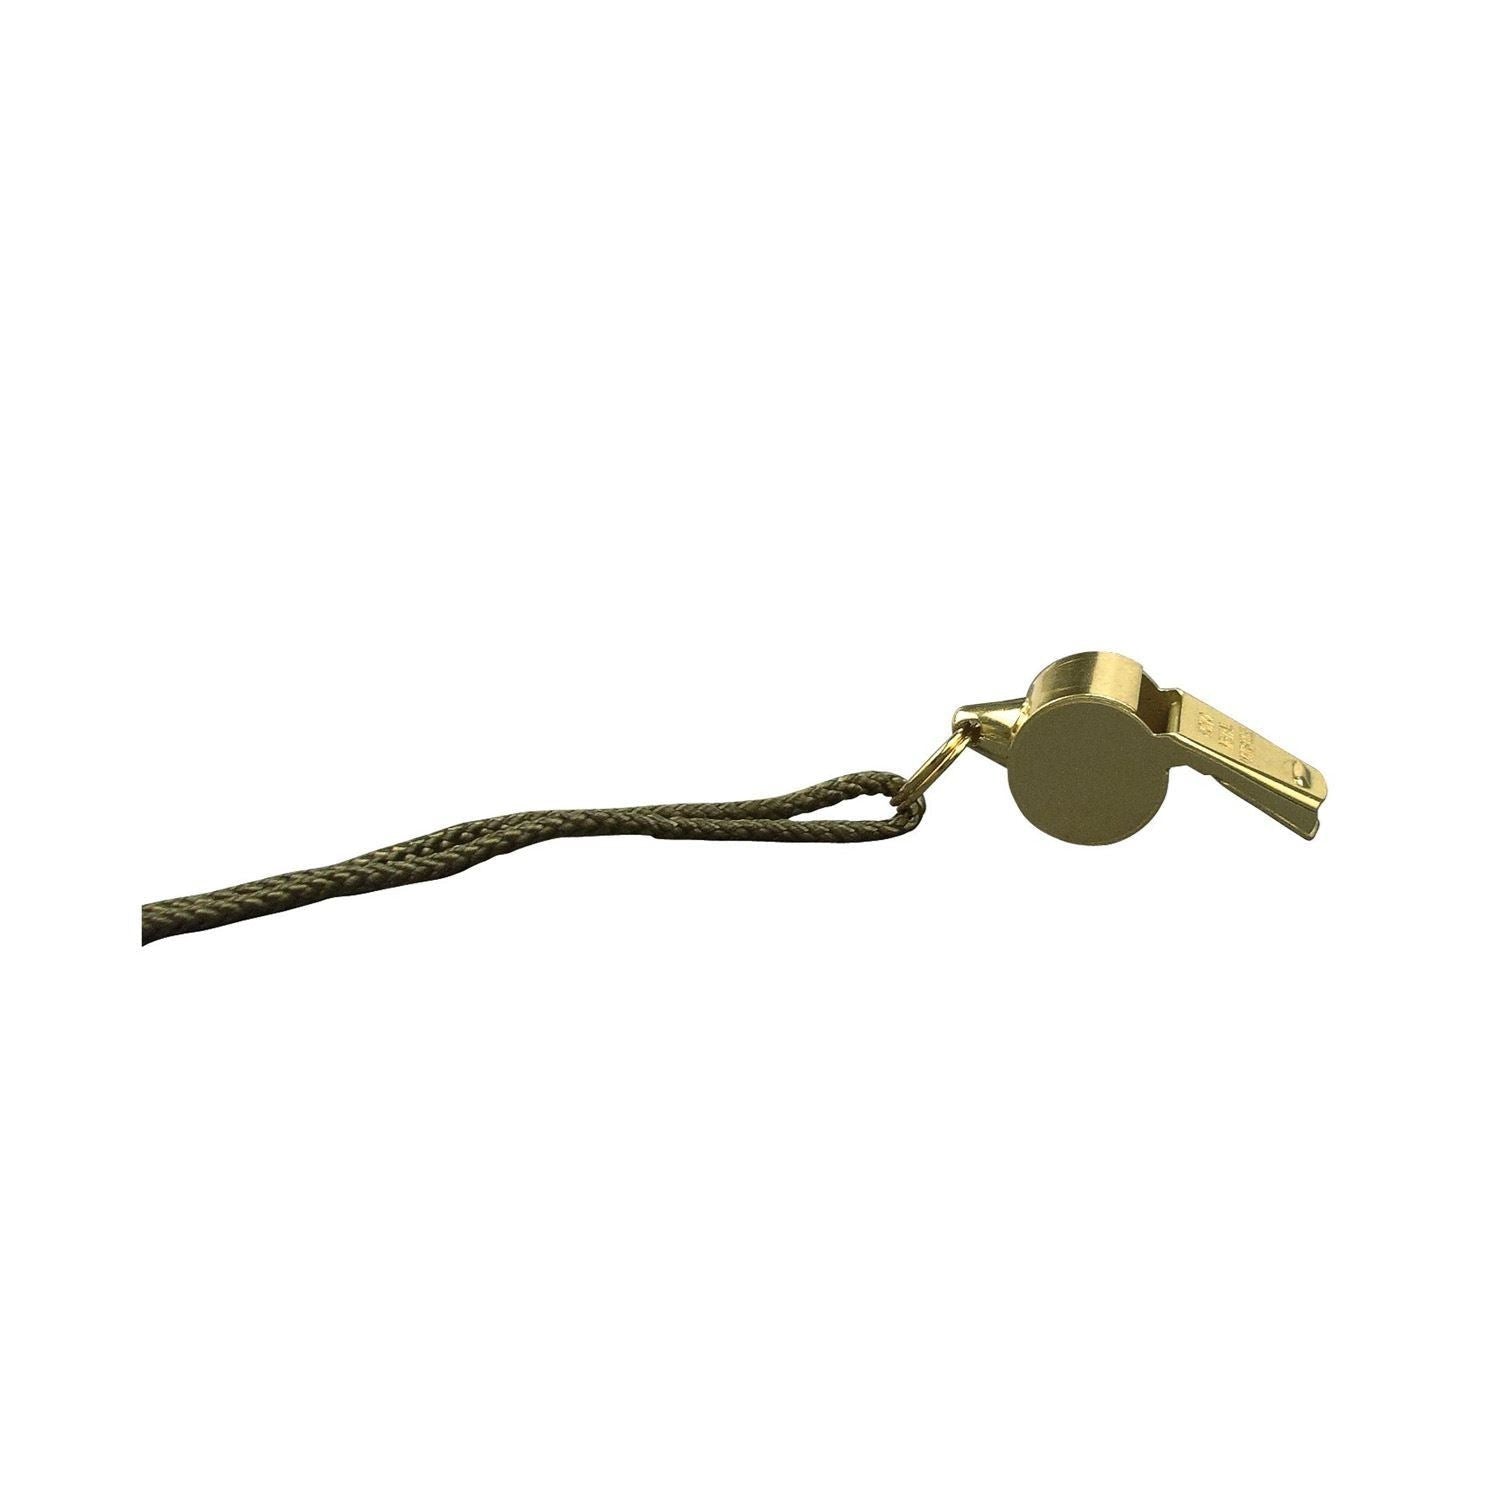 GI Style Police Whistle - Brass Finish, (15 Per Pack)